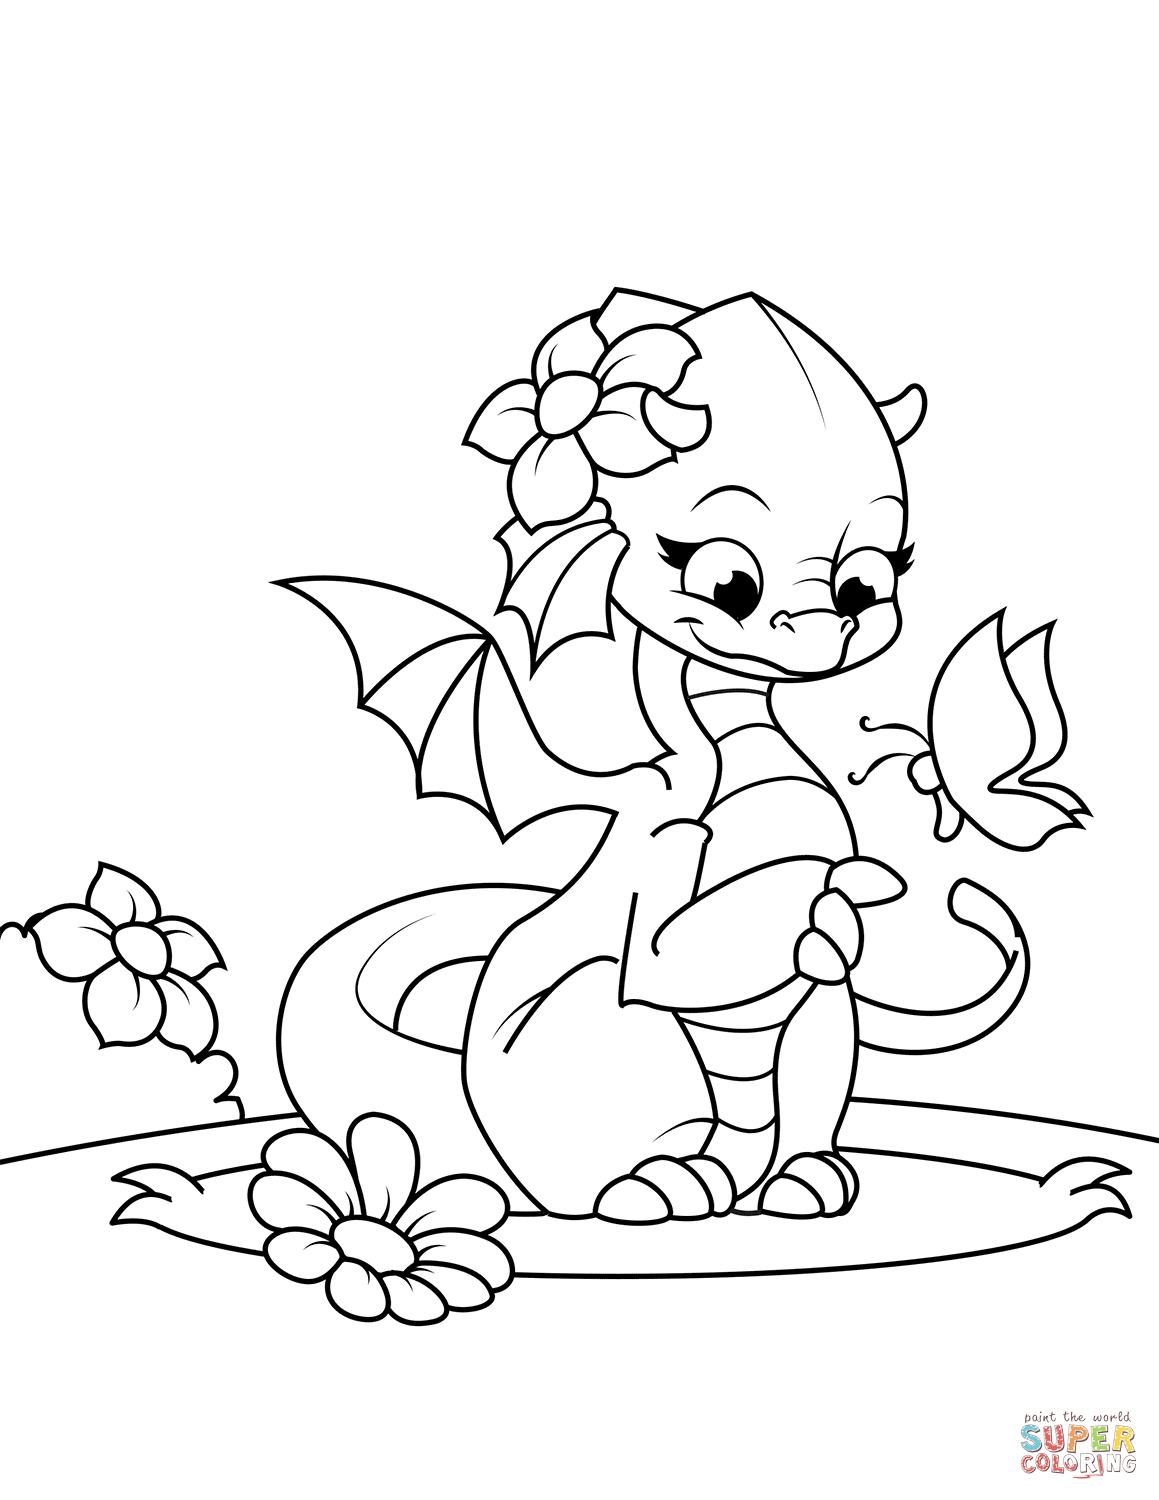 Cute Girl Coloring Pages Cute Girl Dragon Playing With Butterfly Coloring Page Free